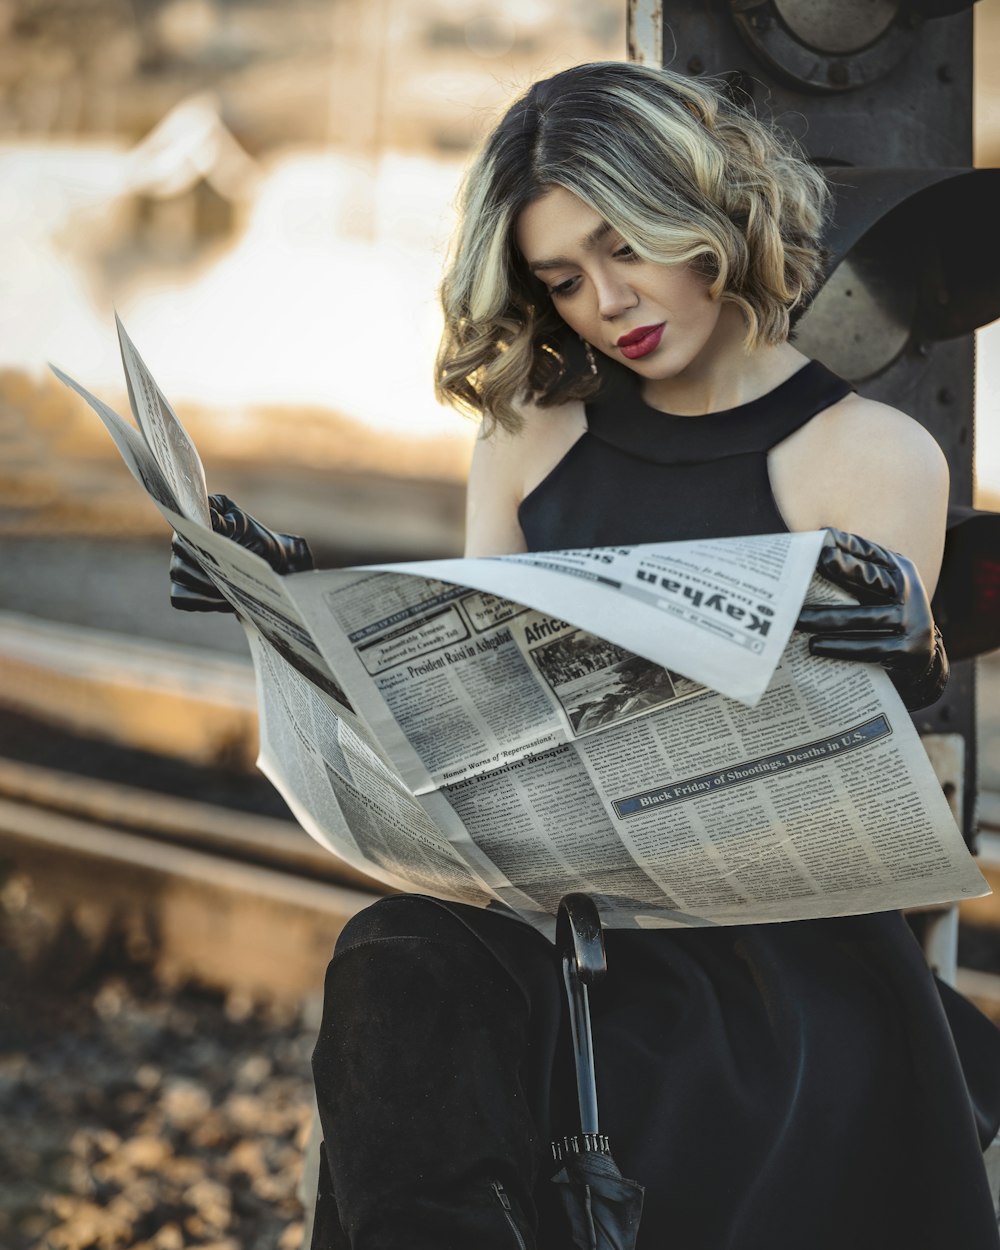 a woman in a black dress is reading a newspaper